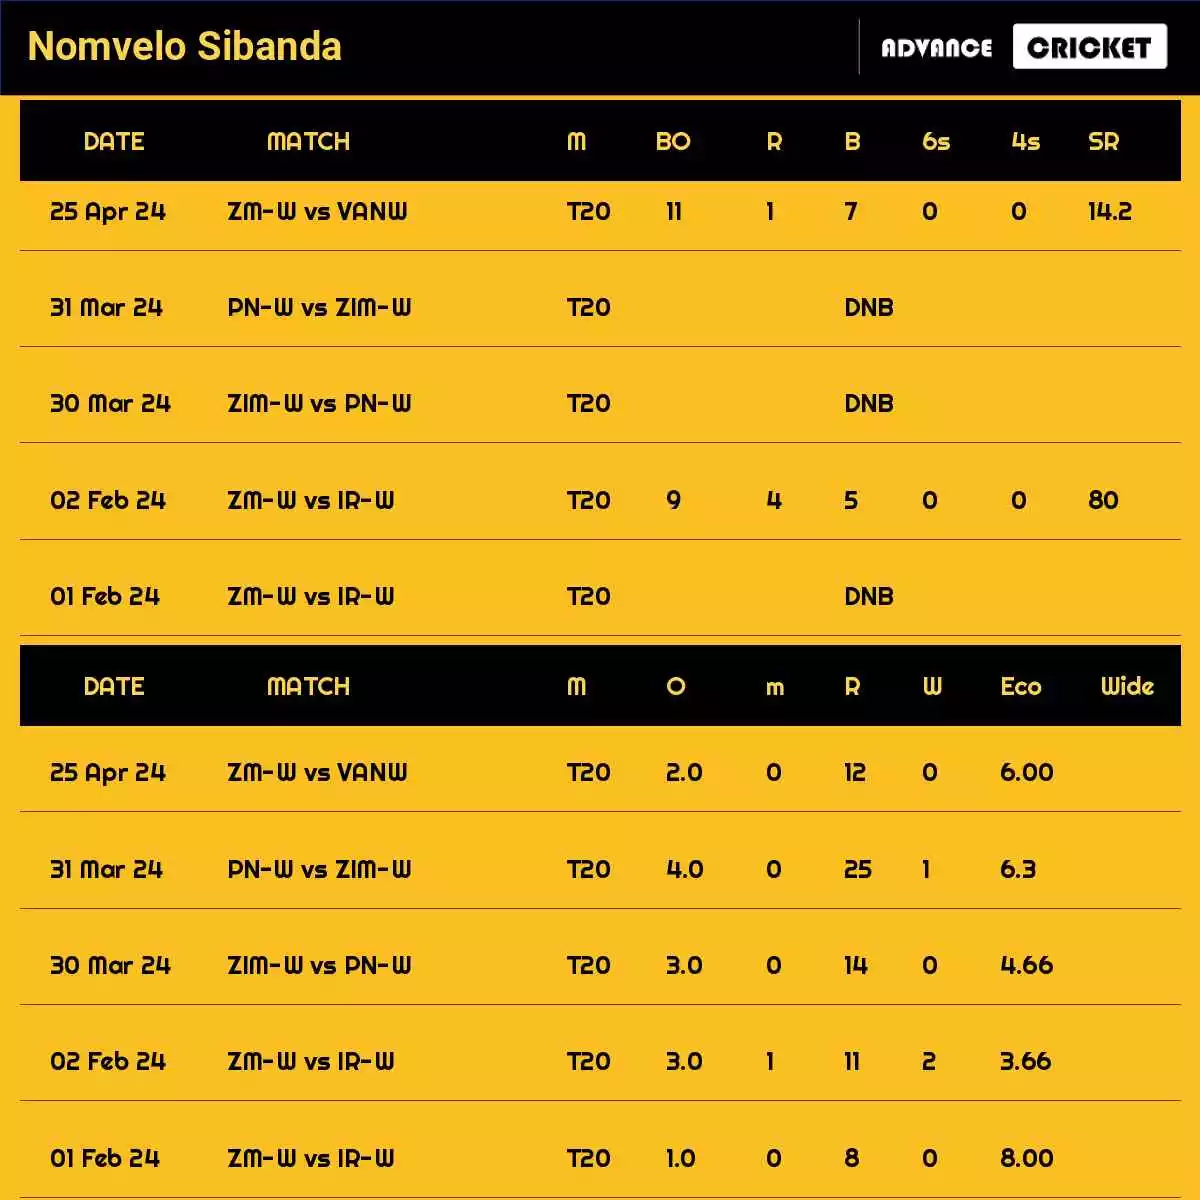 Nomvelo Sibanda Recent Matches Details Date Wise